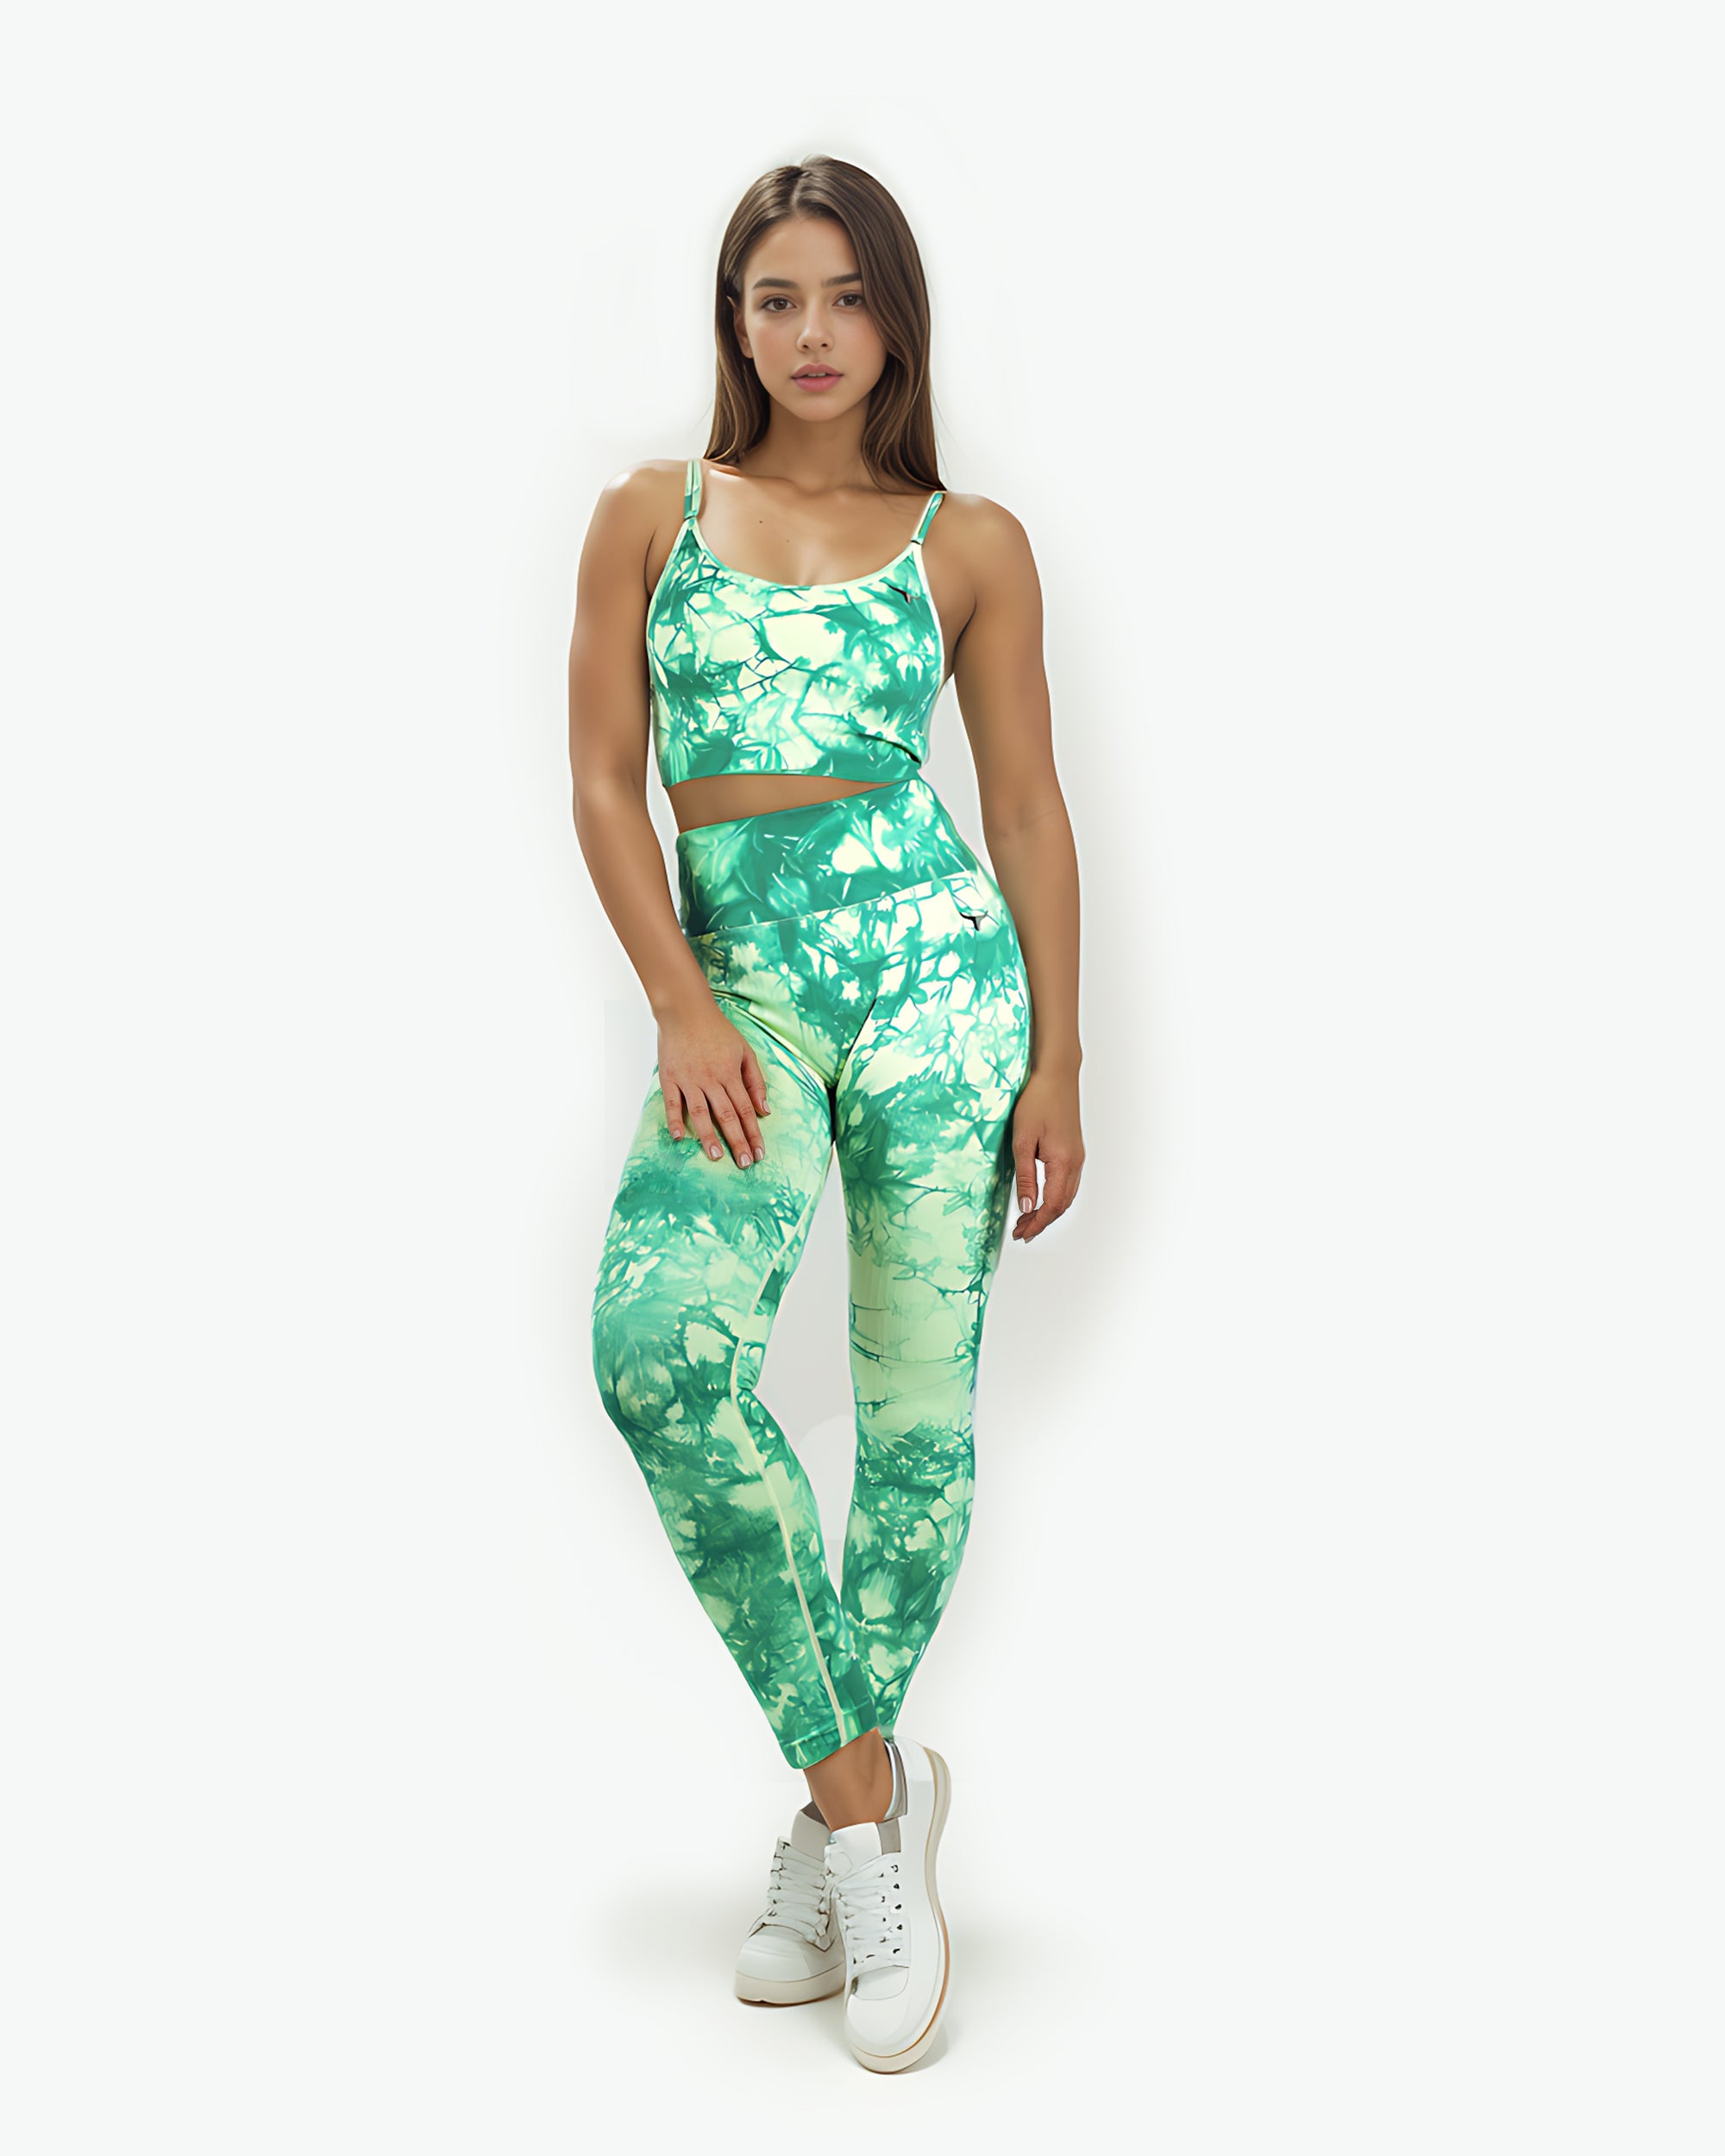 FunkyHues PerformanceStride Fitness Suit - THUGFIT